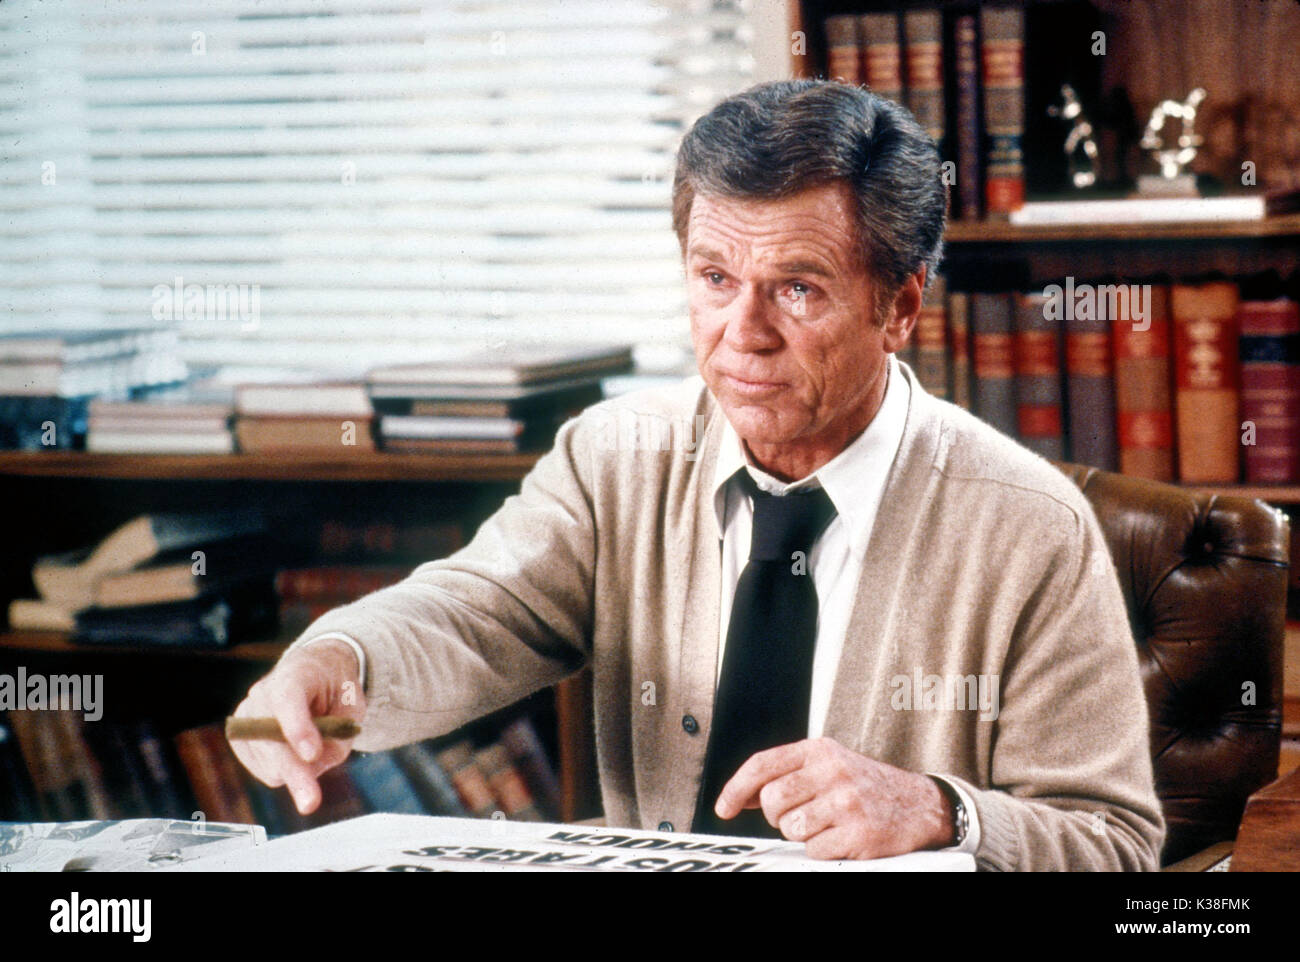 SUPERMAN II WARNER BROS/DC COMICS INC JACKIE COOPER as Perry White Picture from the Ronald Grant Archive SUPERMAN II WARNER BROS/DC COMICS INC JACKIE COOPER as Perry White     Date: 1980 Stock Photo